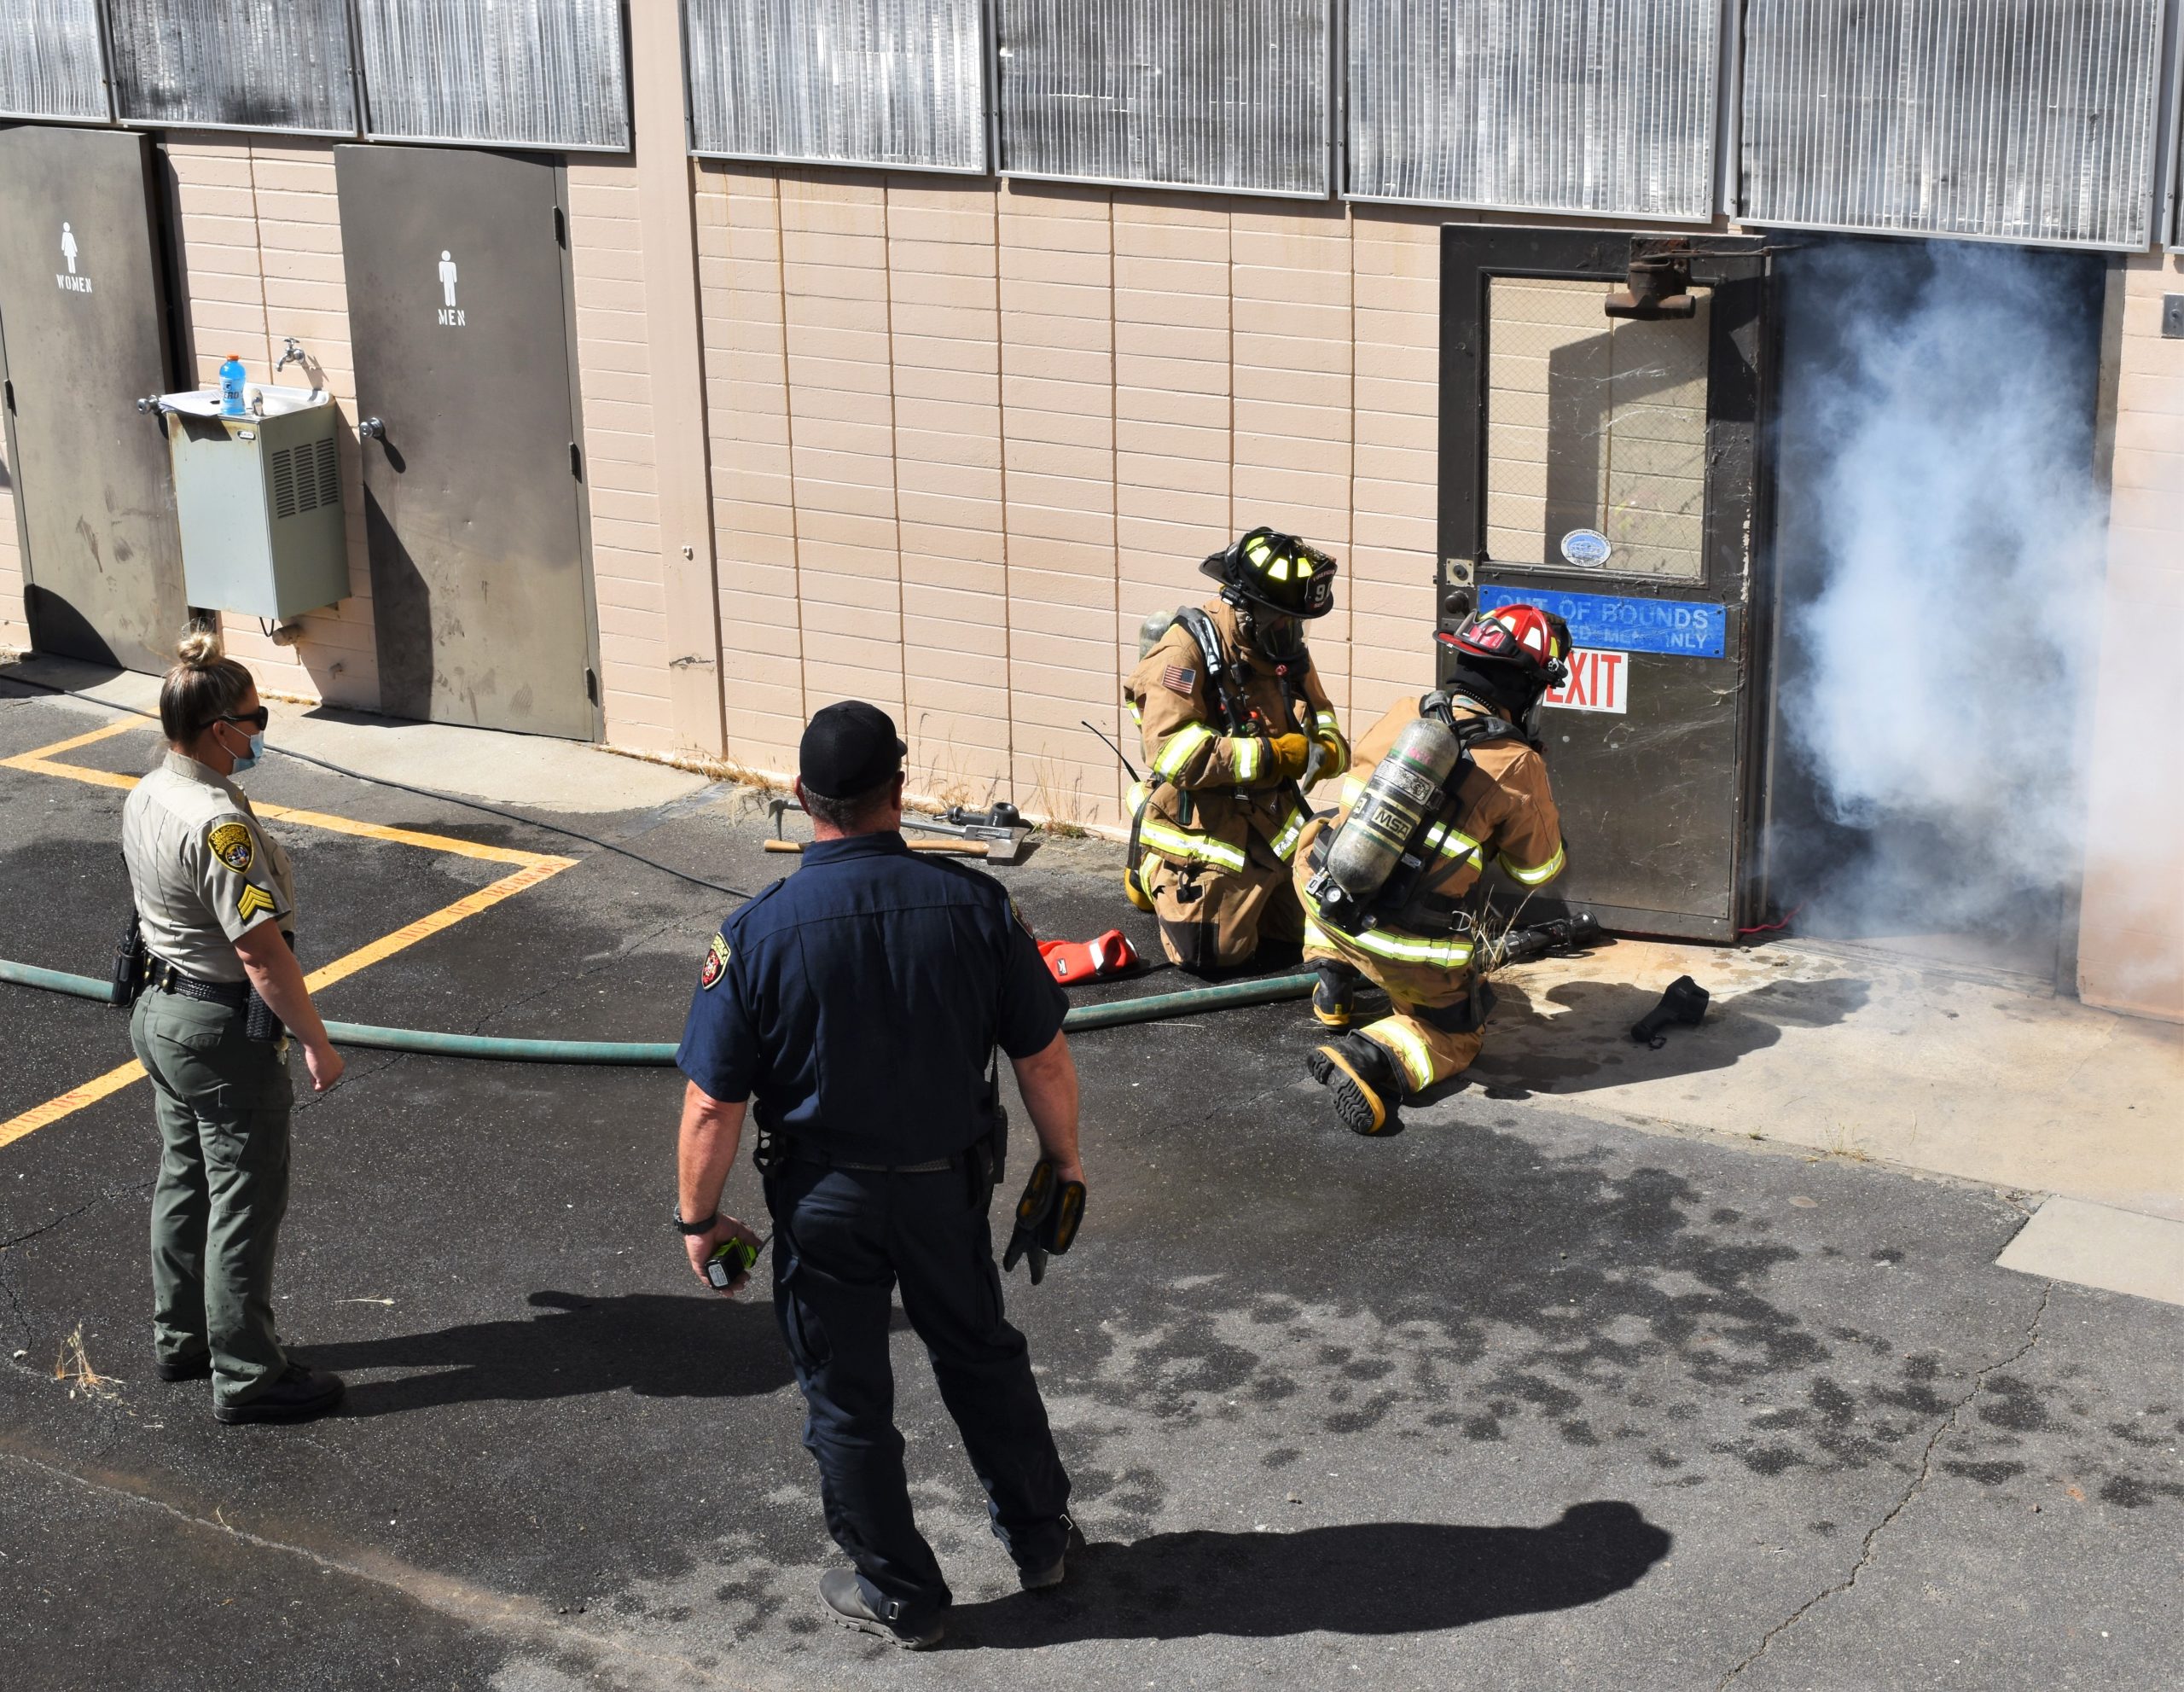 Disaster training for a fire with four staff from various agencies.